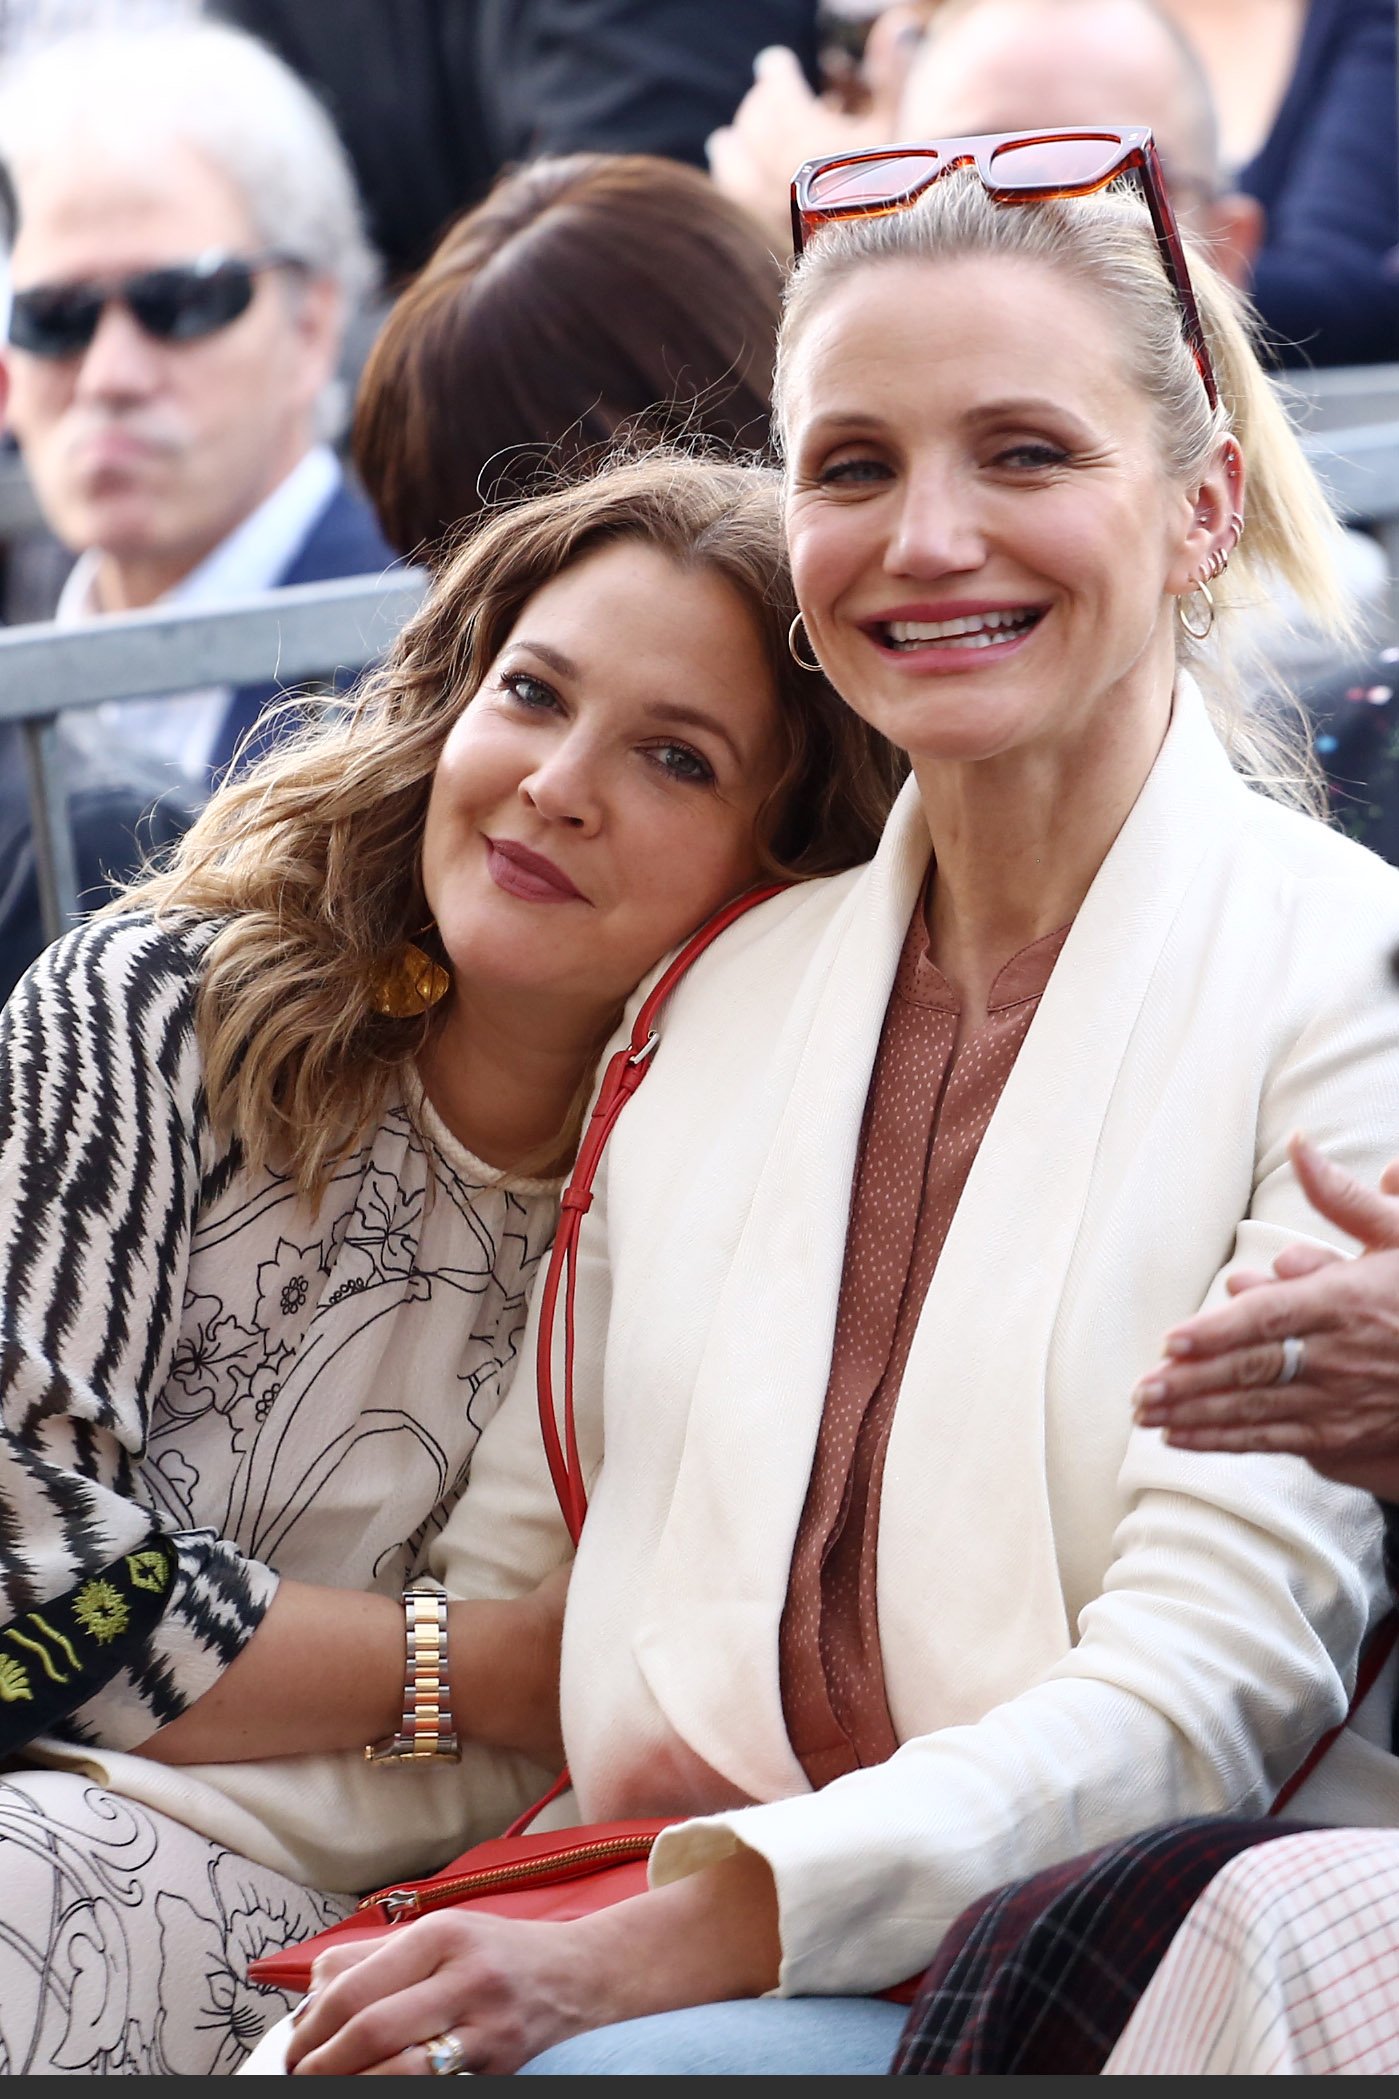 Drew Barrymore and Cameron Diaz attend a ceremony honoring Lucy Liu with a star on the Hollywood Walk of Fame on May 1, 2019 in Hollywood, California. | Source: Getty Images